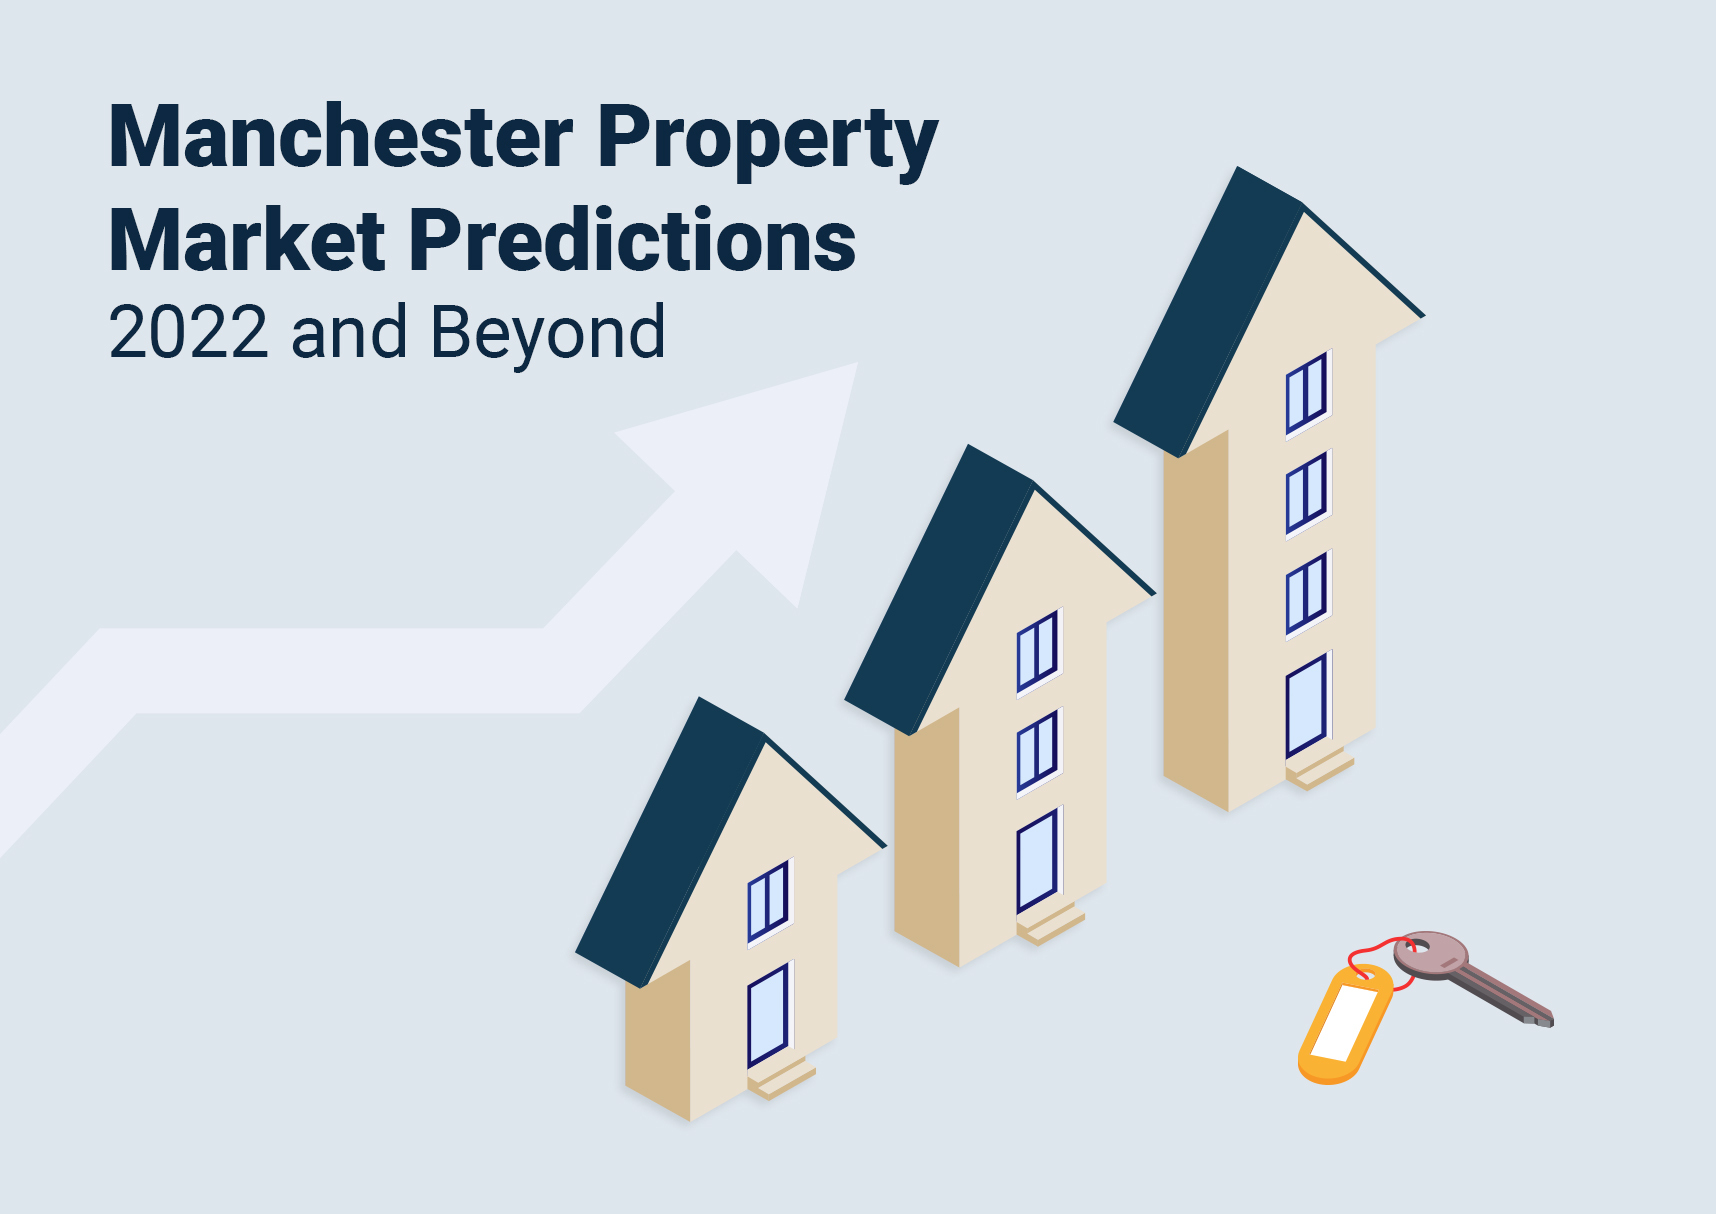 Manchester House Prices State of Manchester Property in 2022